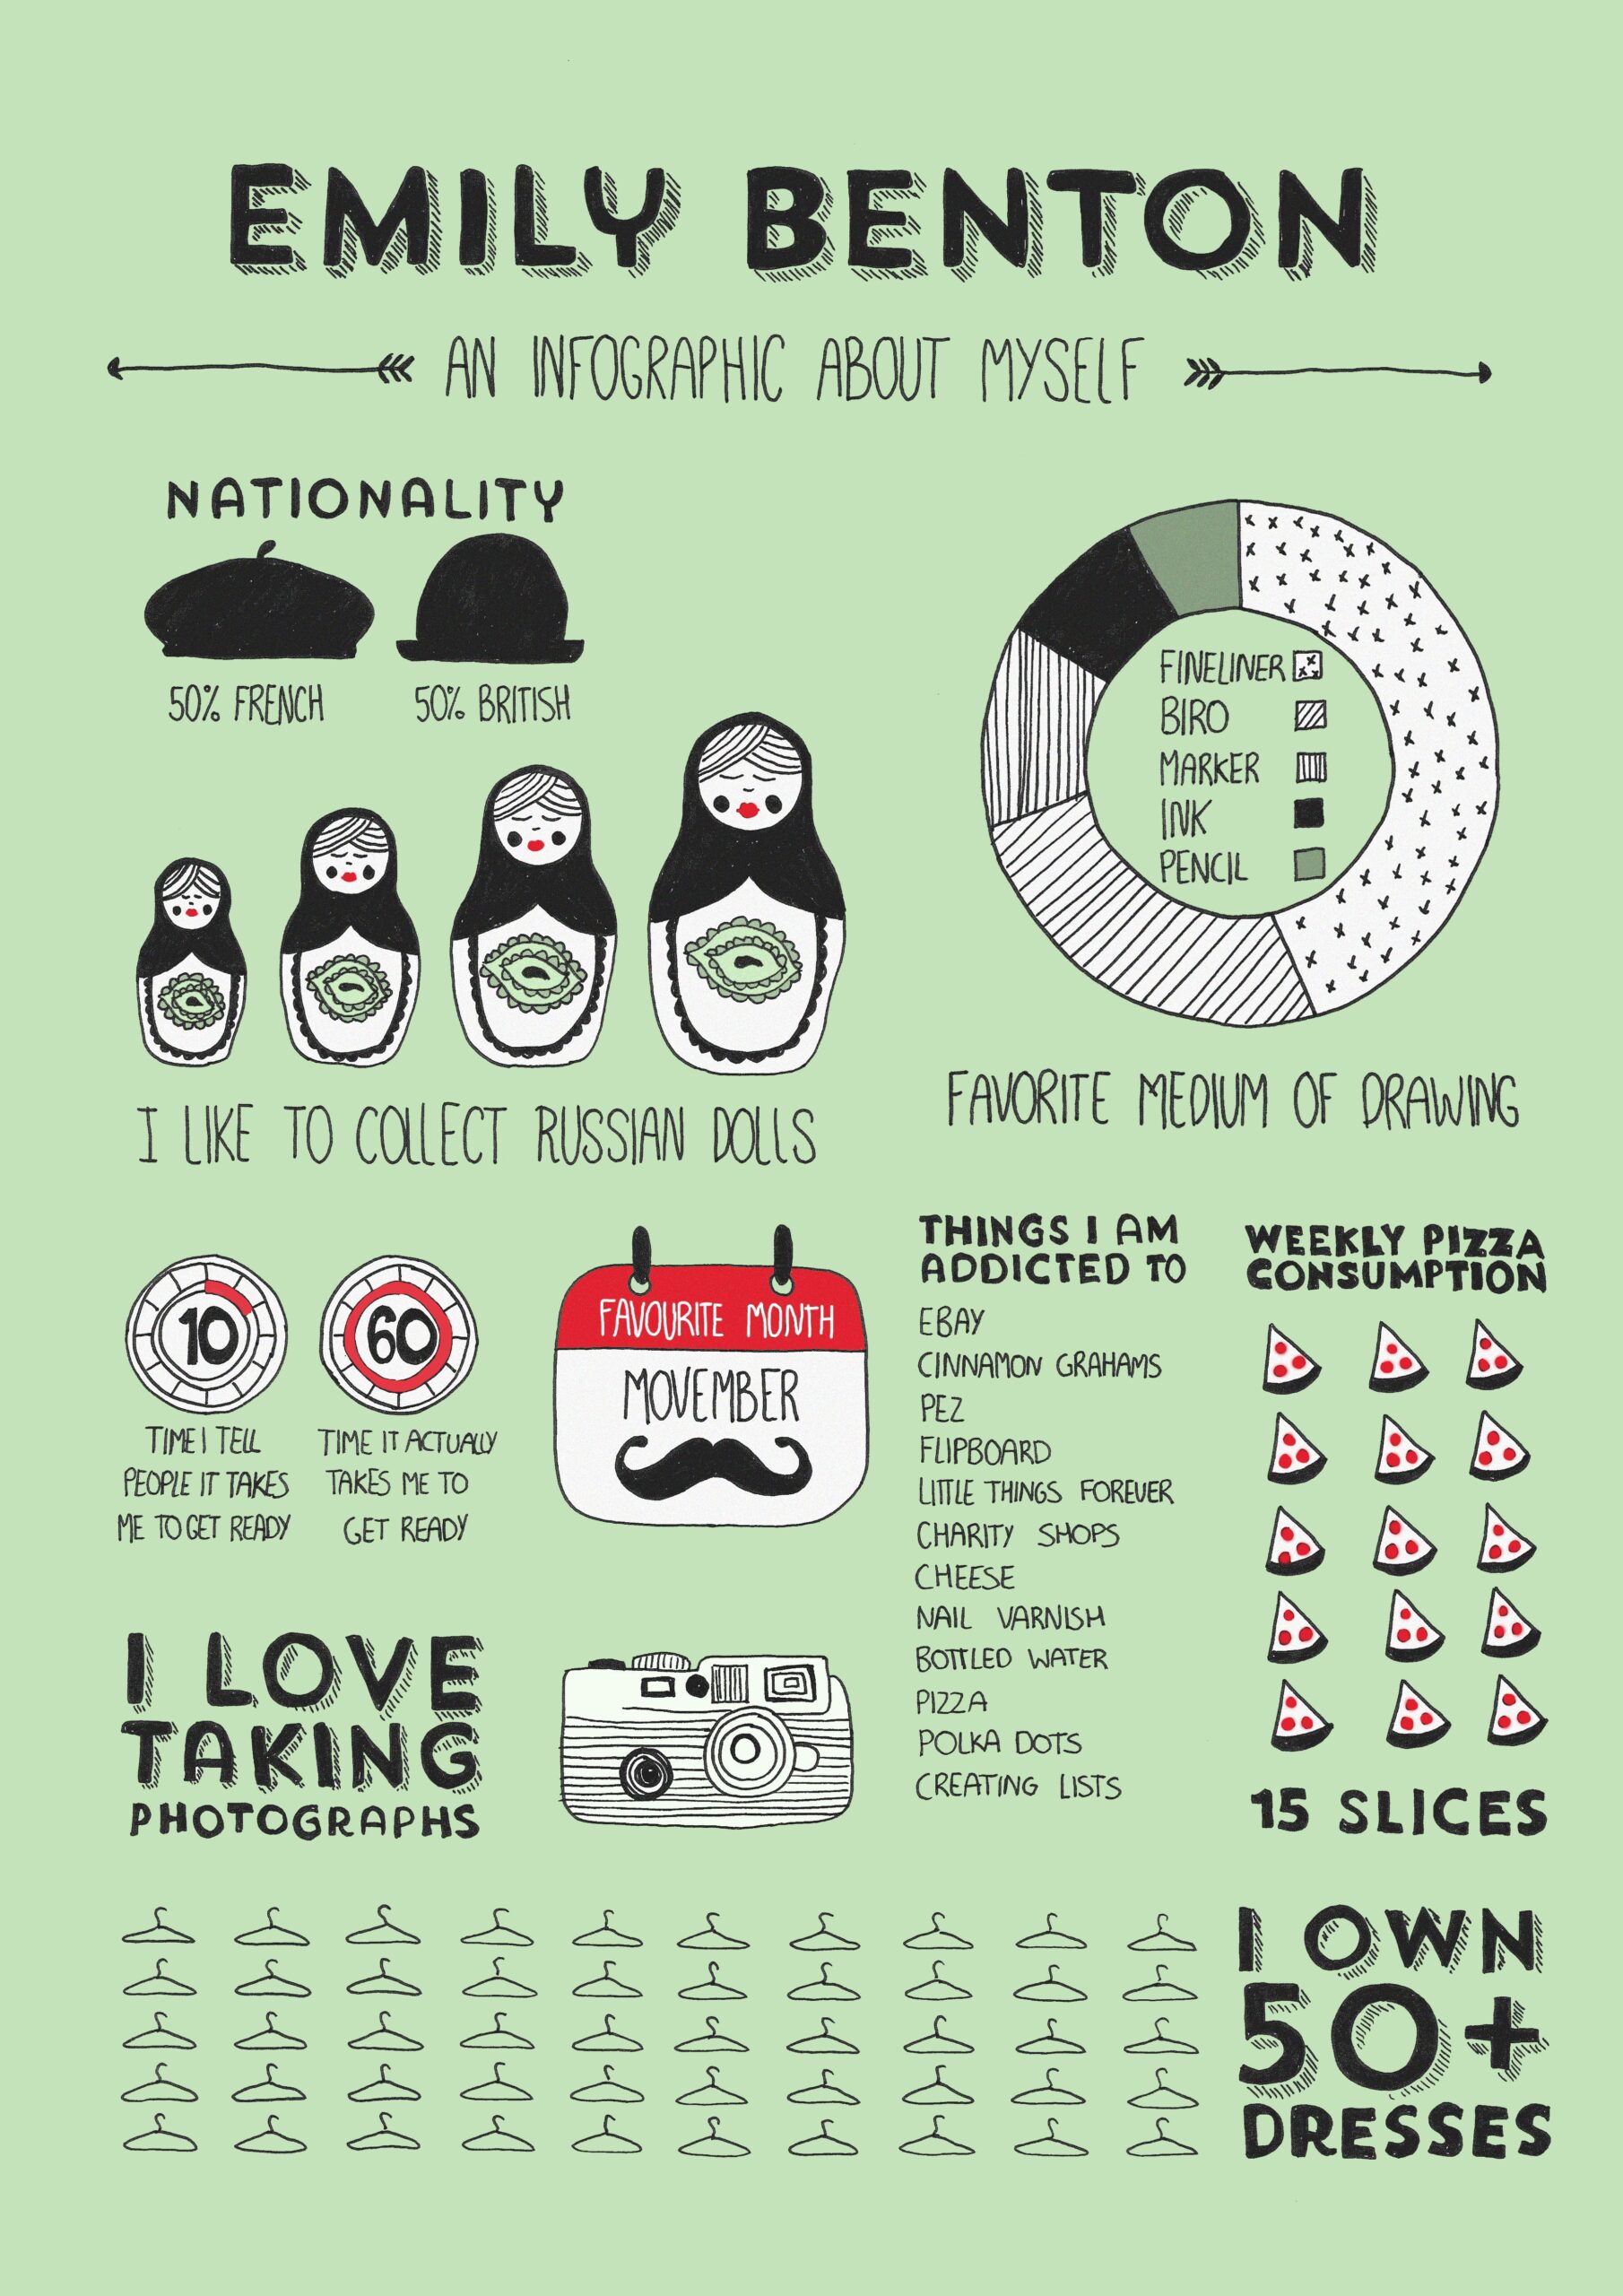 All You Need To Know About Me in a #infographic | Resume design creative, Creative resume ...